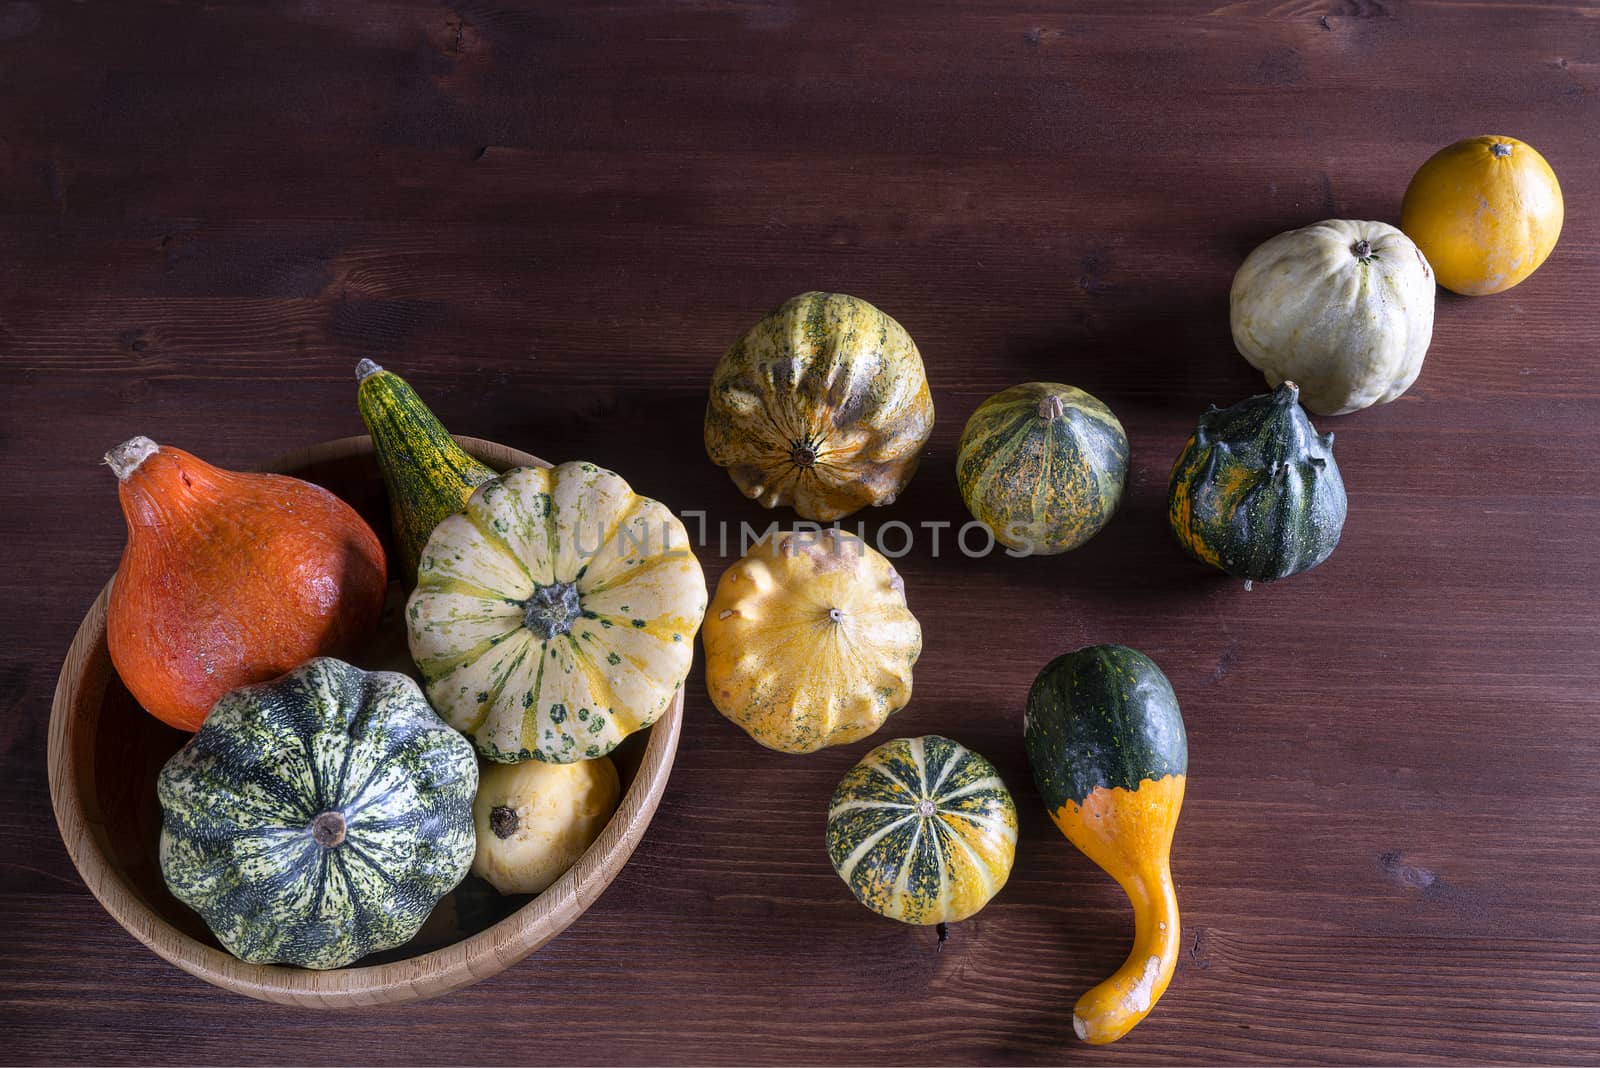 Some small pumpkins by sergiodv